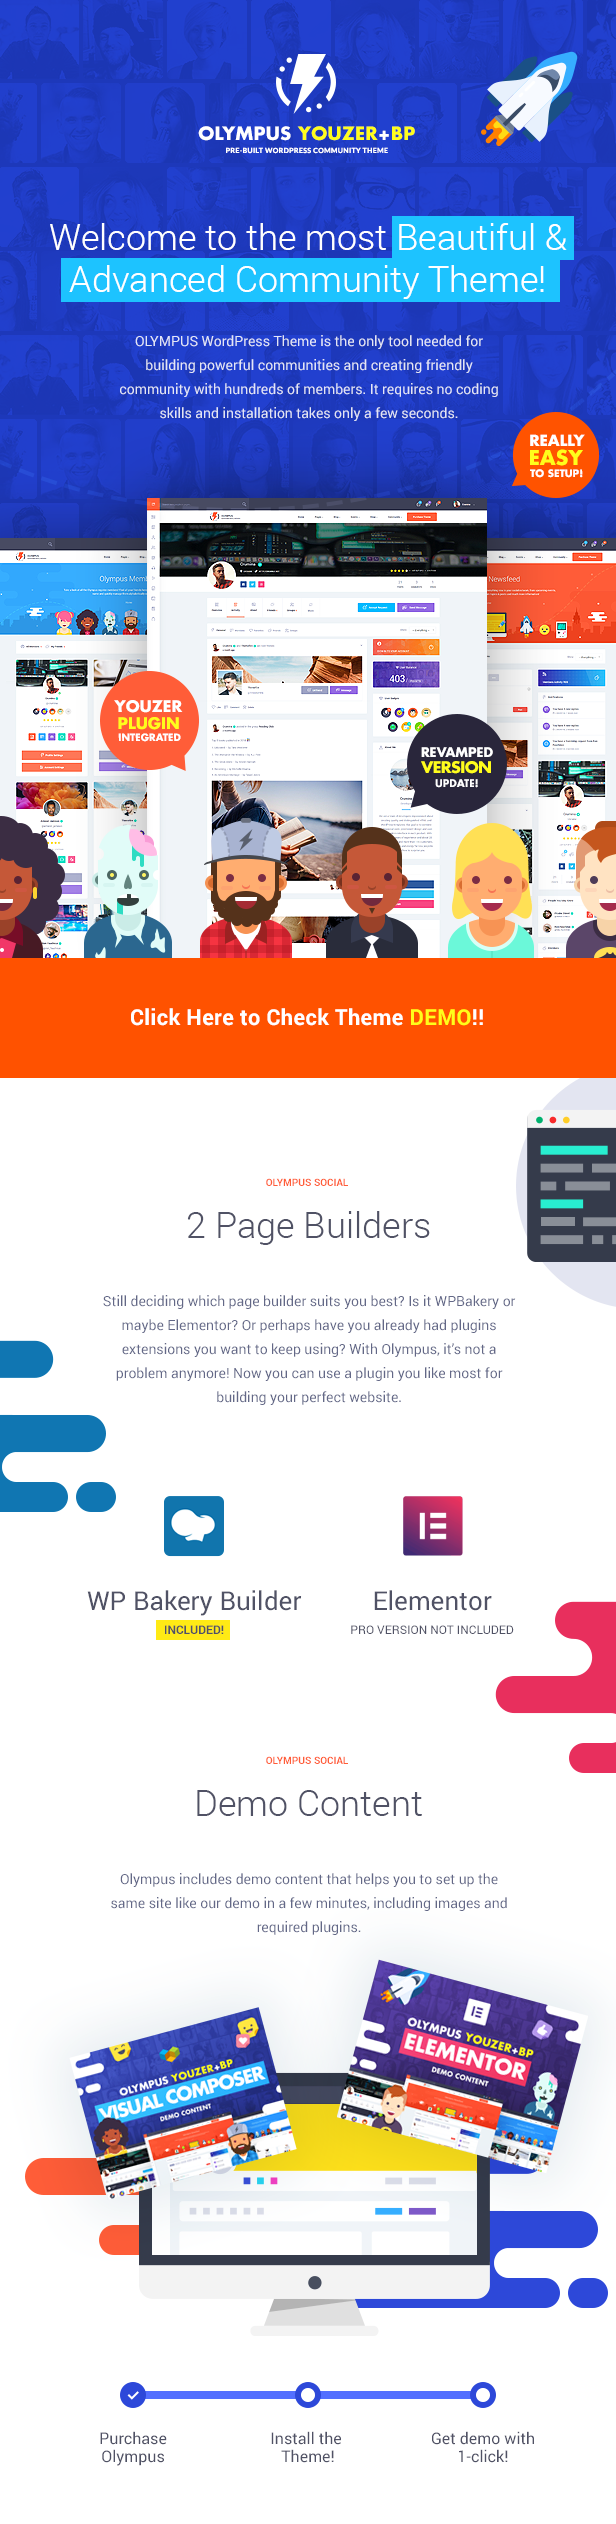 Welcome to the most Beautiful & Advanced Social WP Theme!